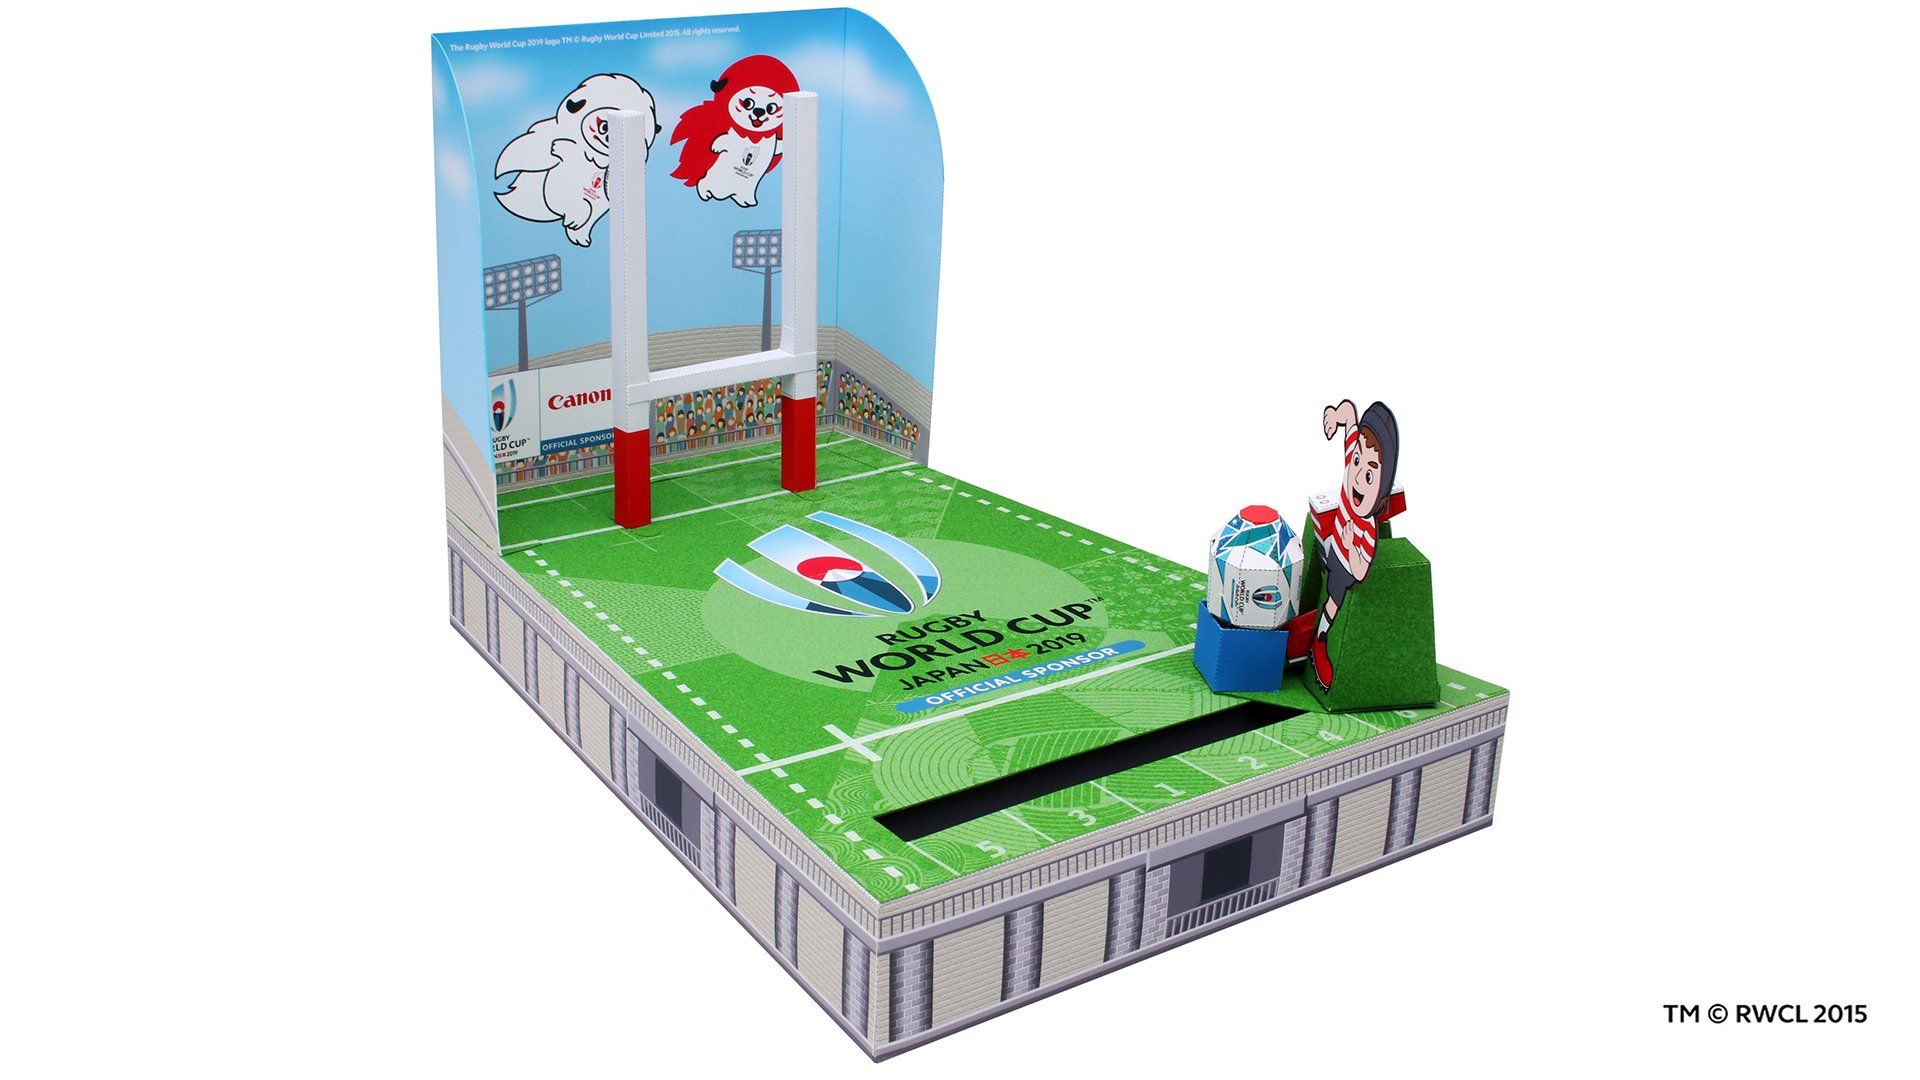 The Rugby Goal Kick Game created with Canon's Creative Park.